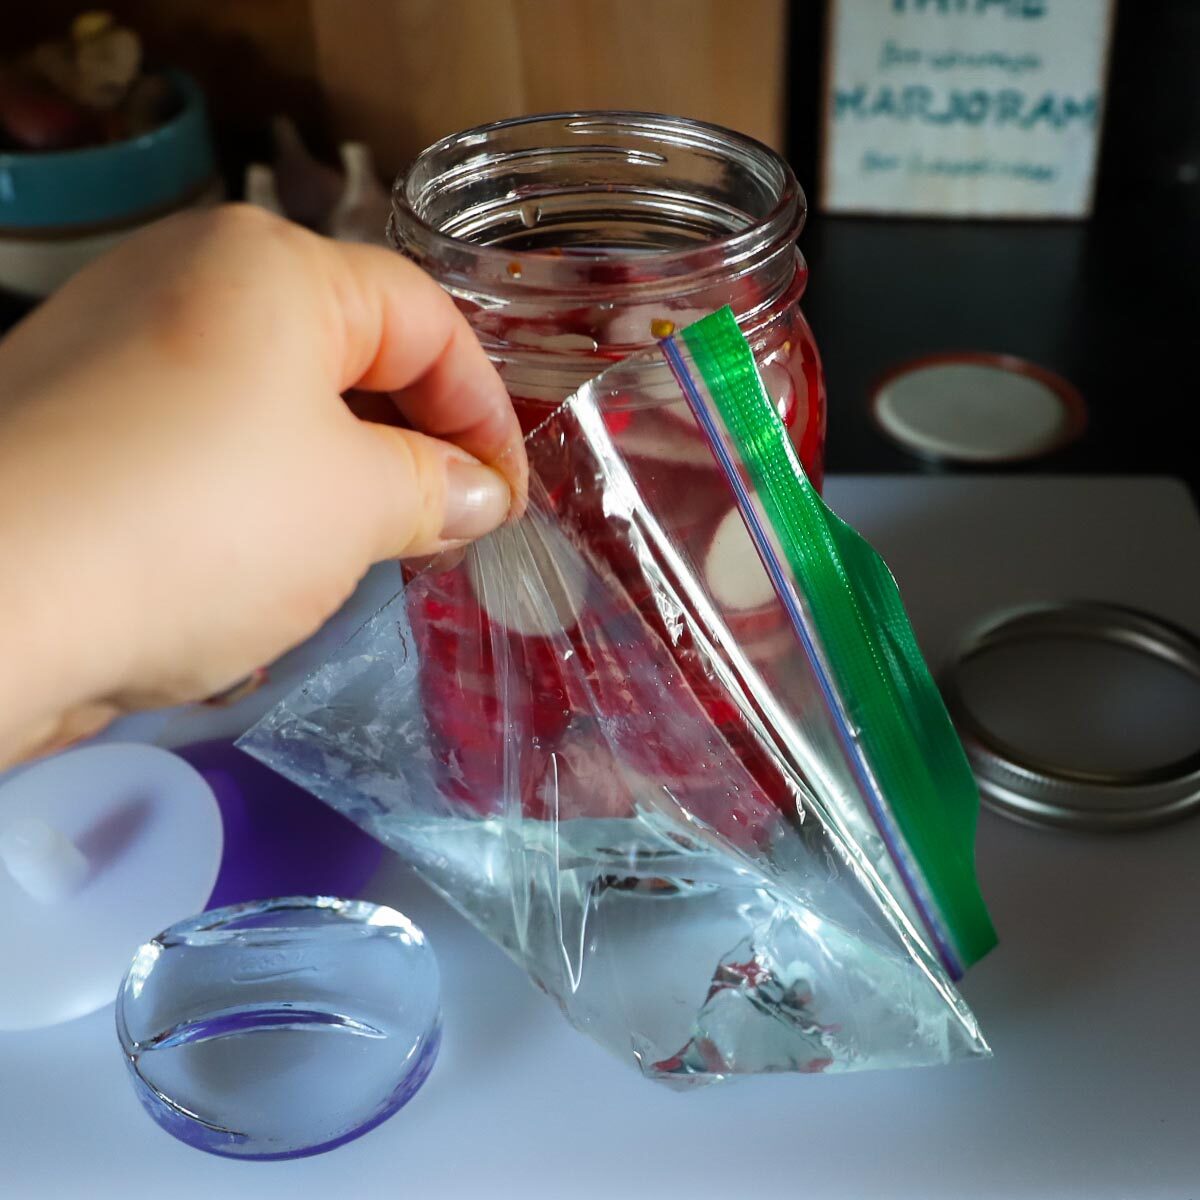 A small, green topped clear zip top baggie is being held up to show the water in the bag that is a makeshift fermenting weight. The jar of radishes is behind.